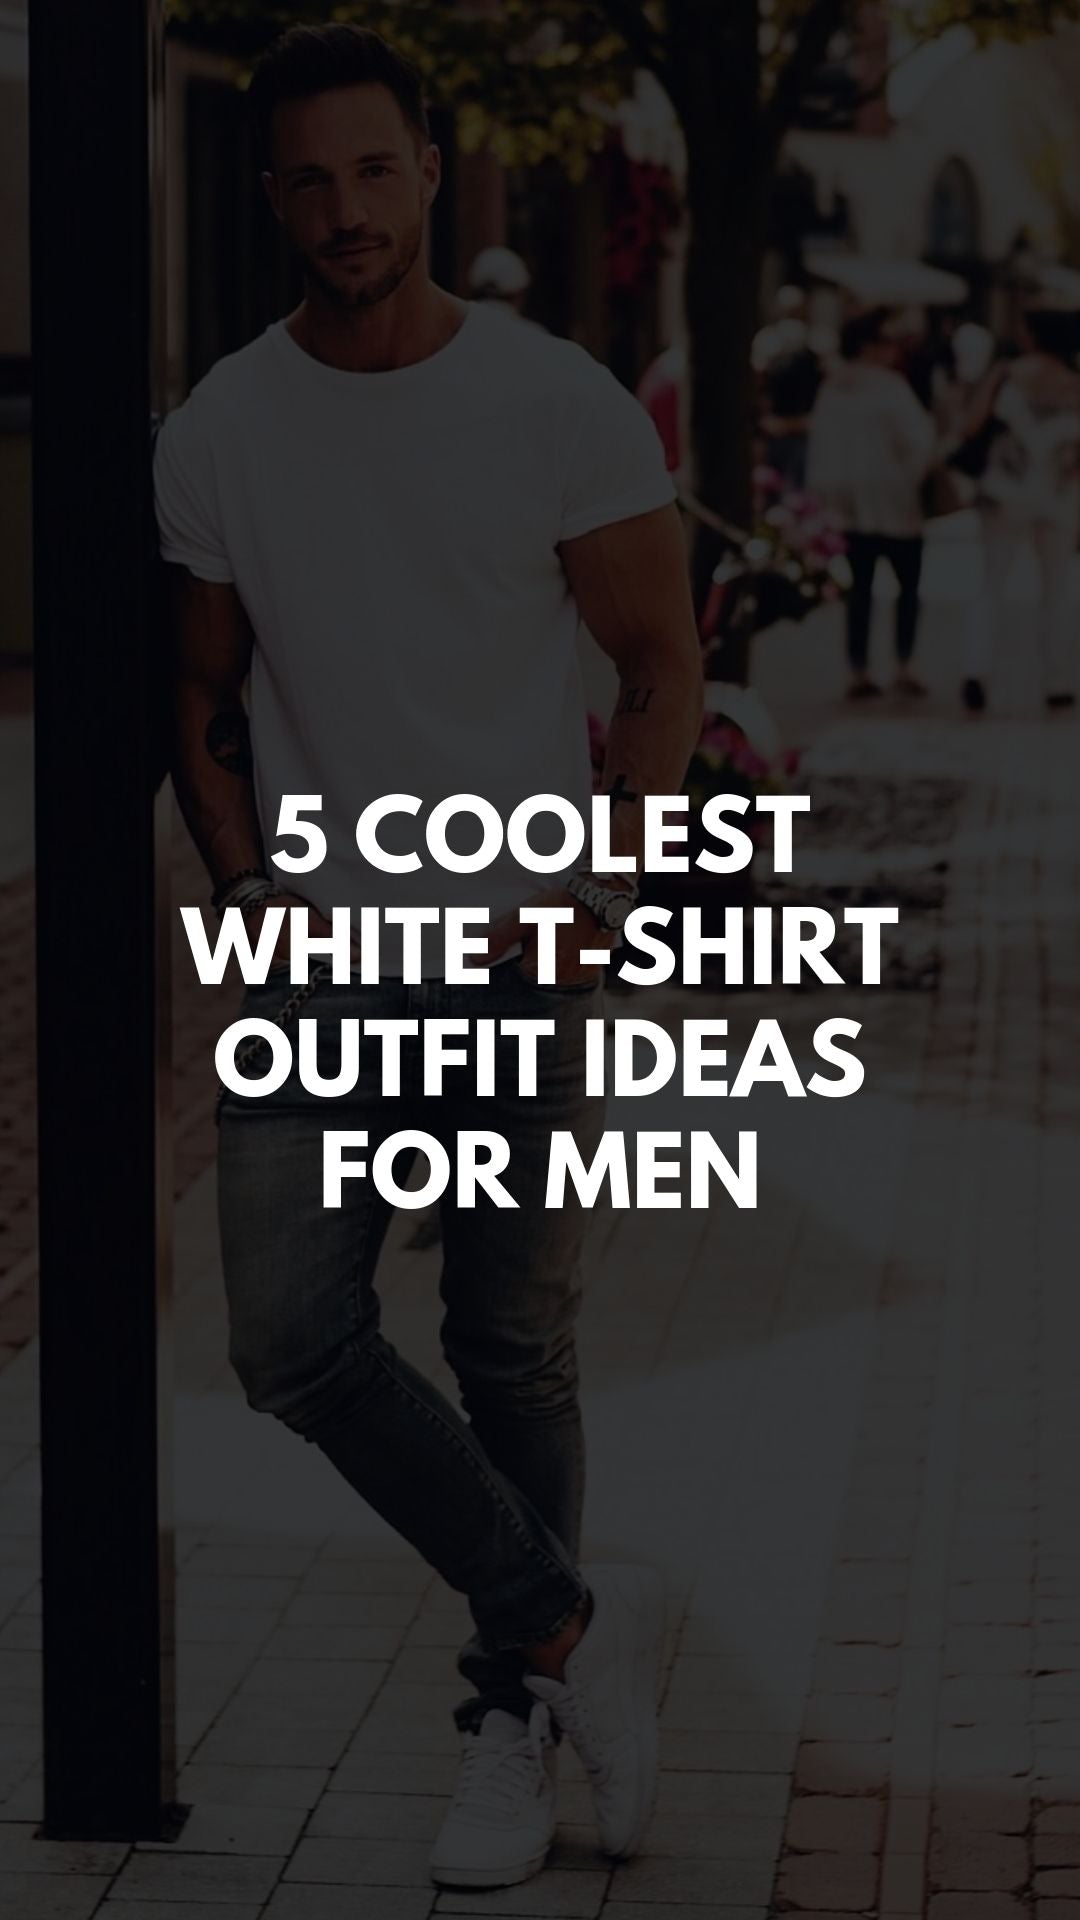 5 Denim Shorts Outfit Ideas For Men To Look Cool